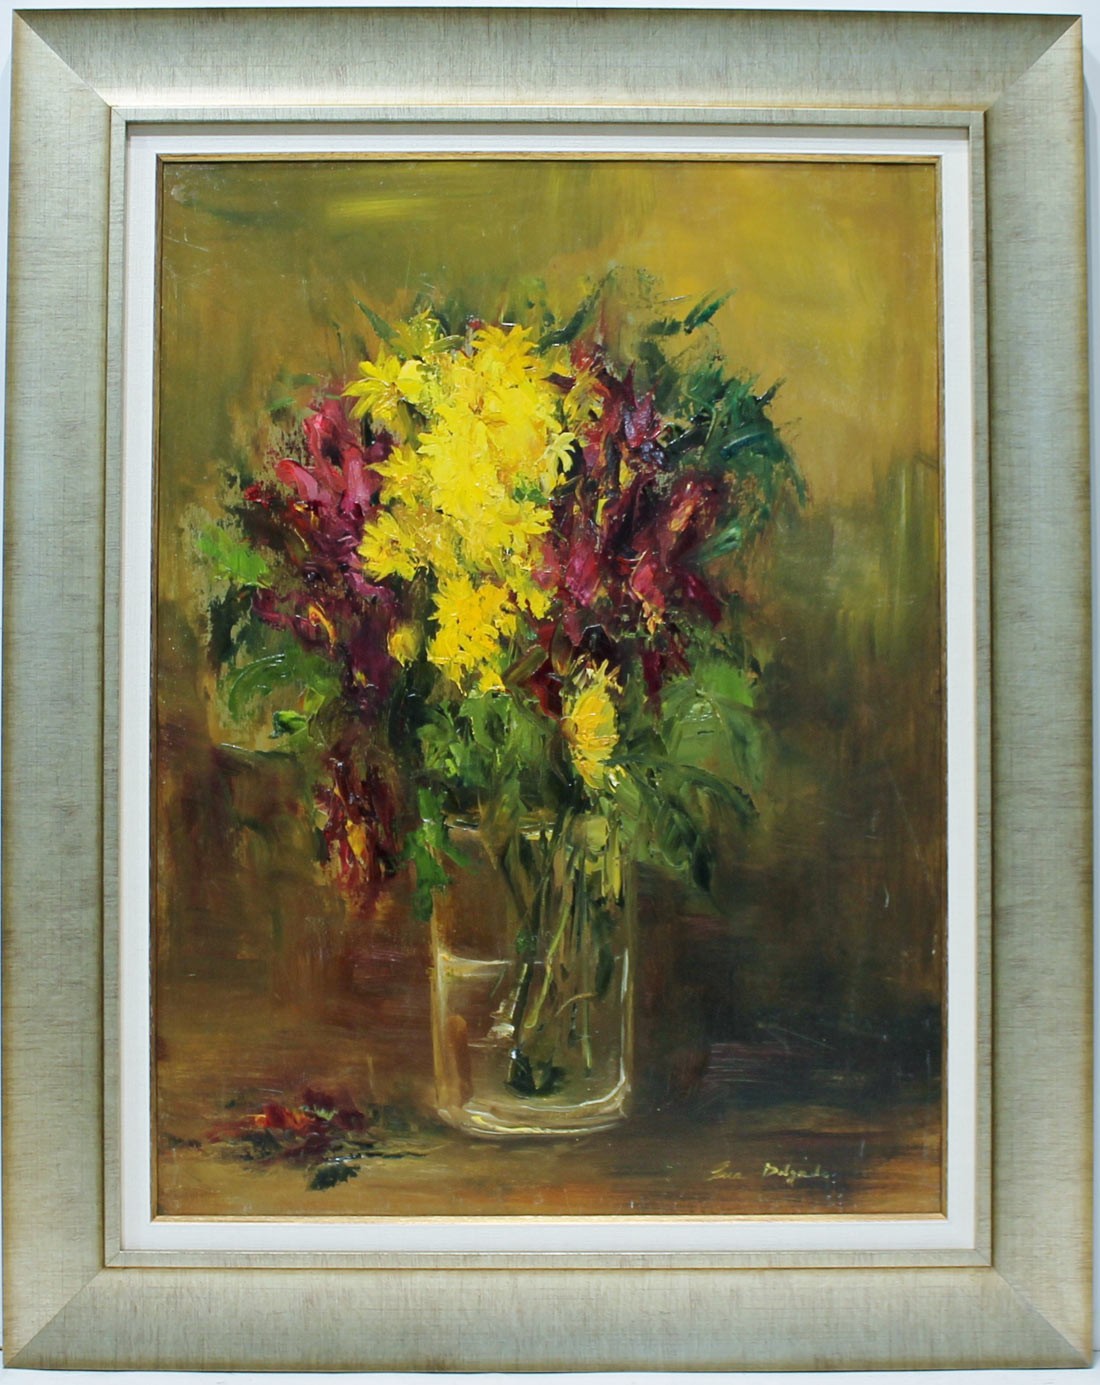 Ana Delgado: Yellow and red flowers